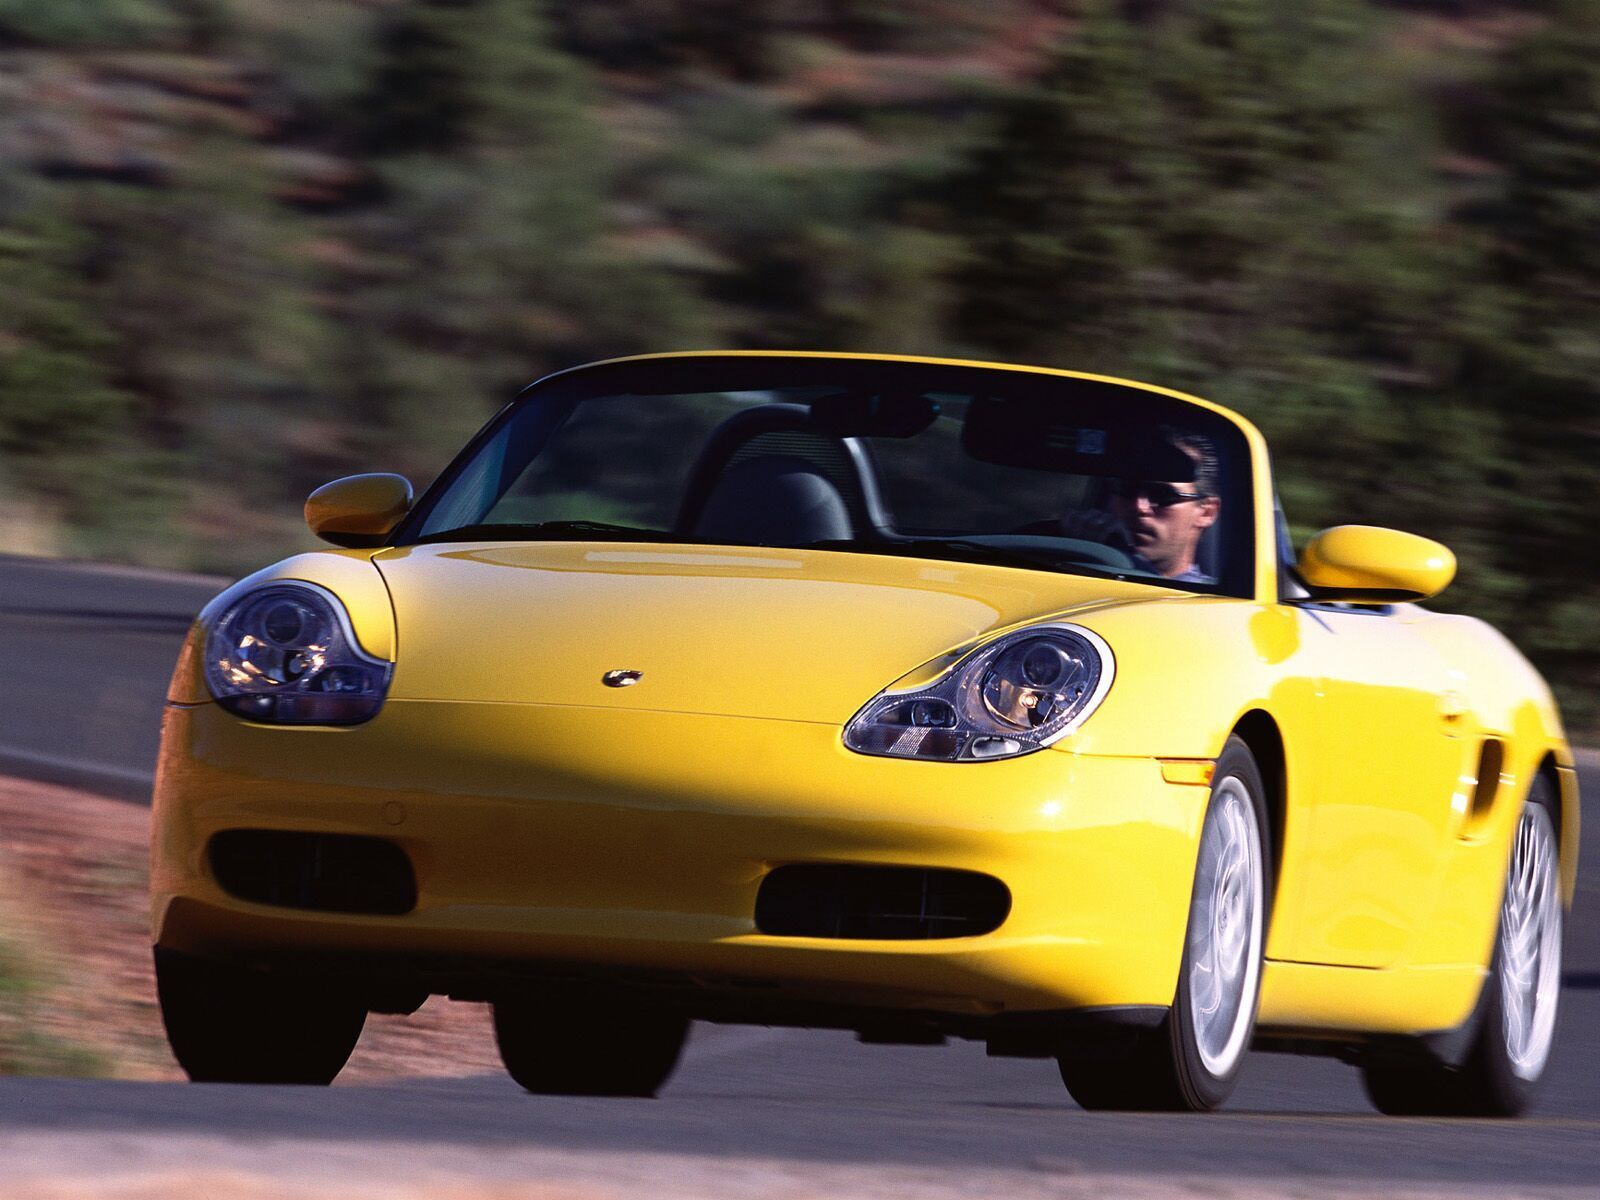 10 Sports Cars Anyone Can Buy For Under $5,000 And Look Rich